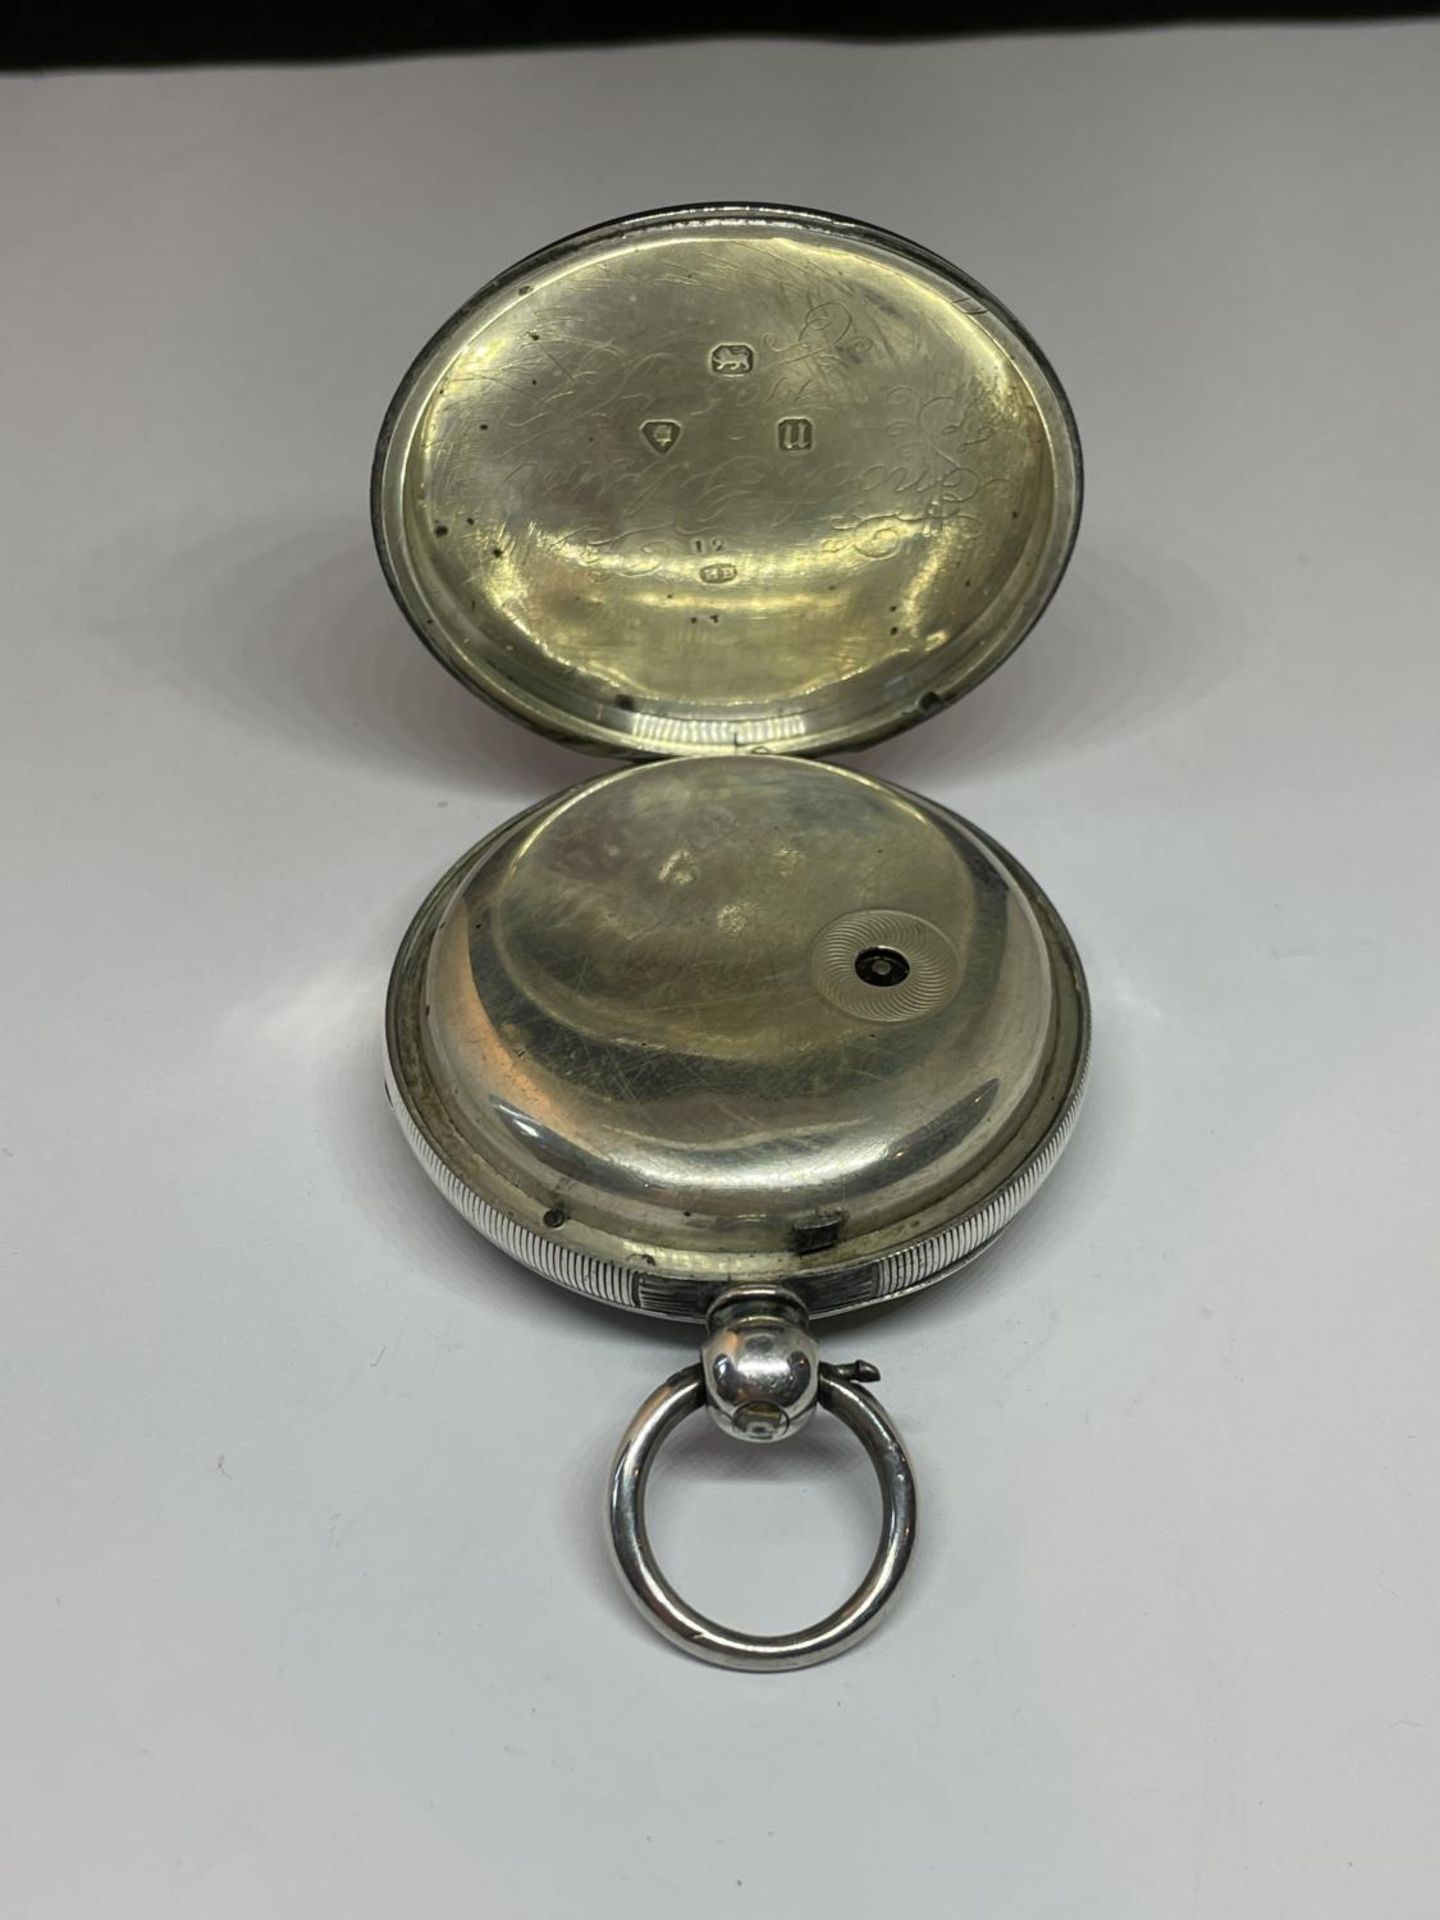 A HALLMARKED LONDON SILVER POCKET WATCH - Image 3 of 4